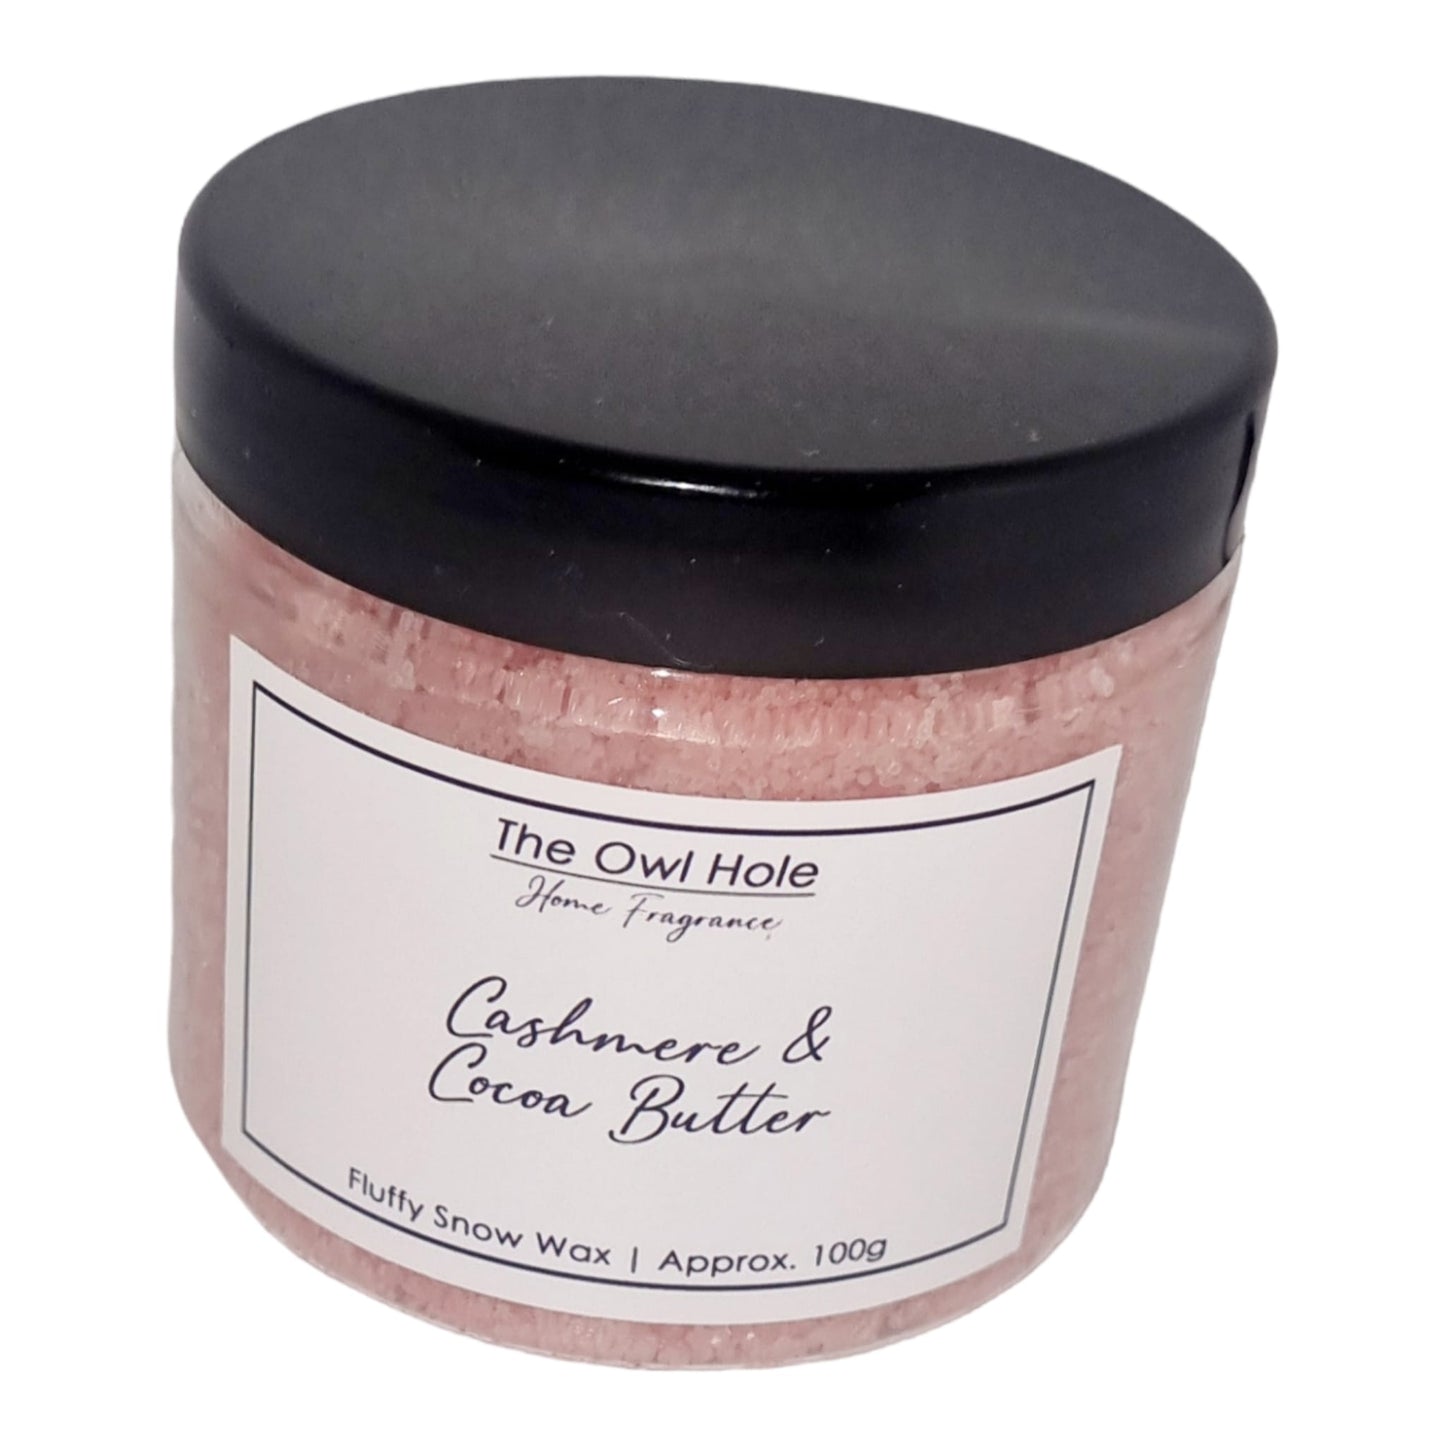 Cashmere & Cocoa Butter Fluffy Snow Wax 100g